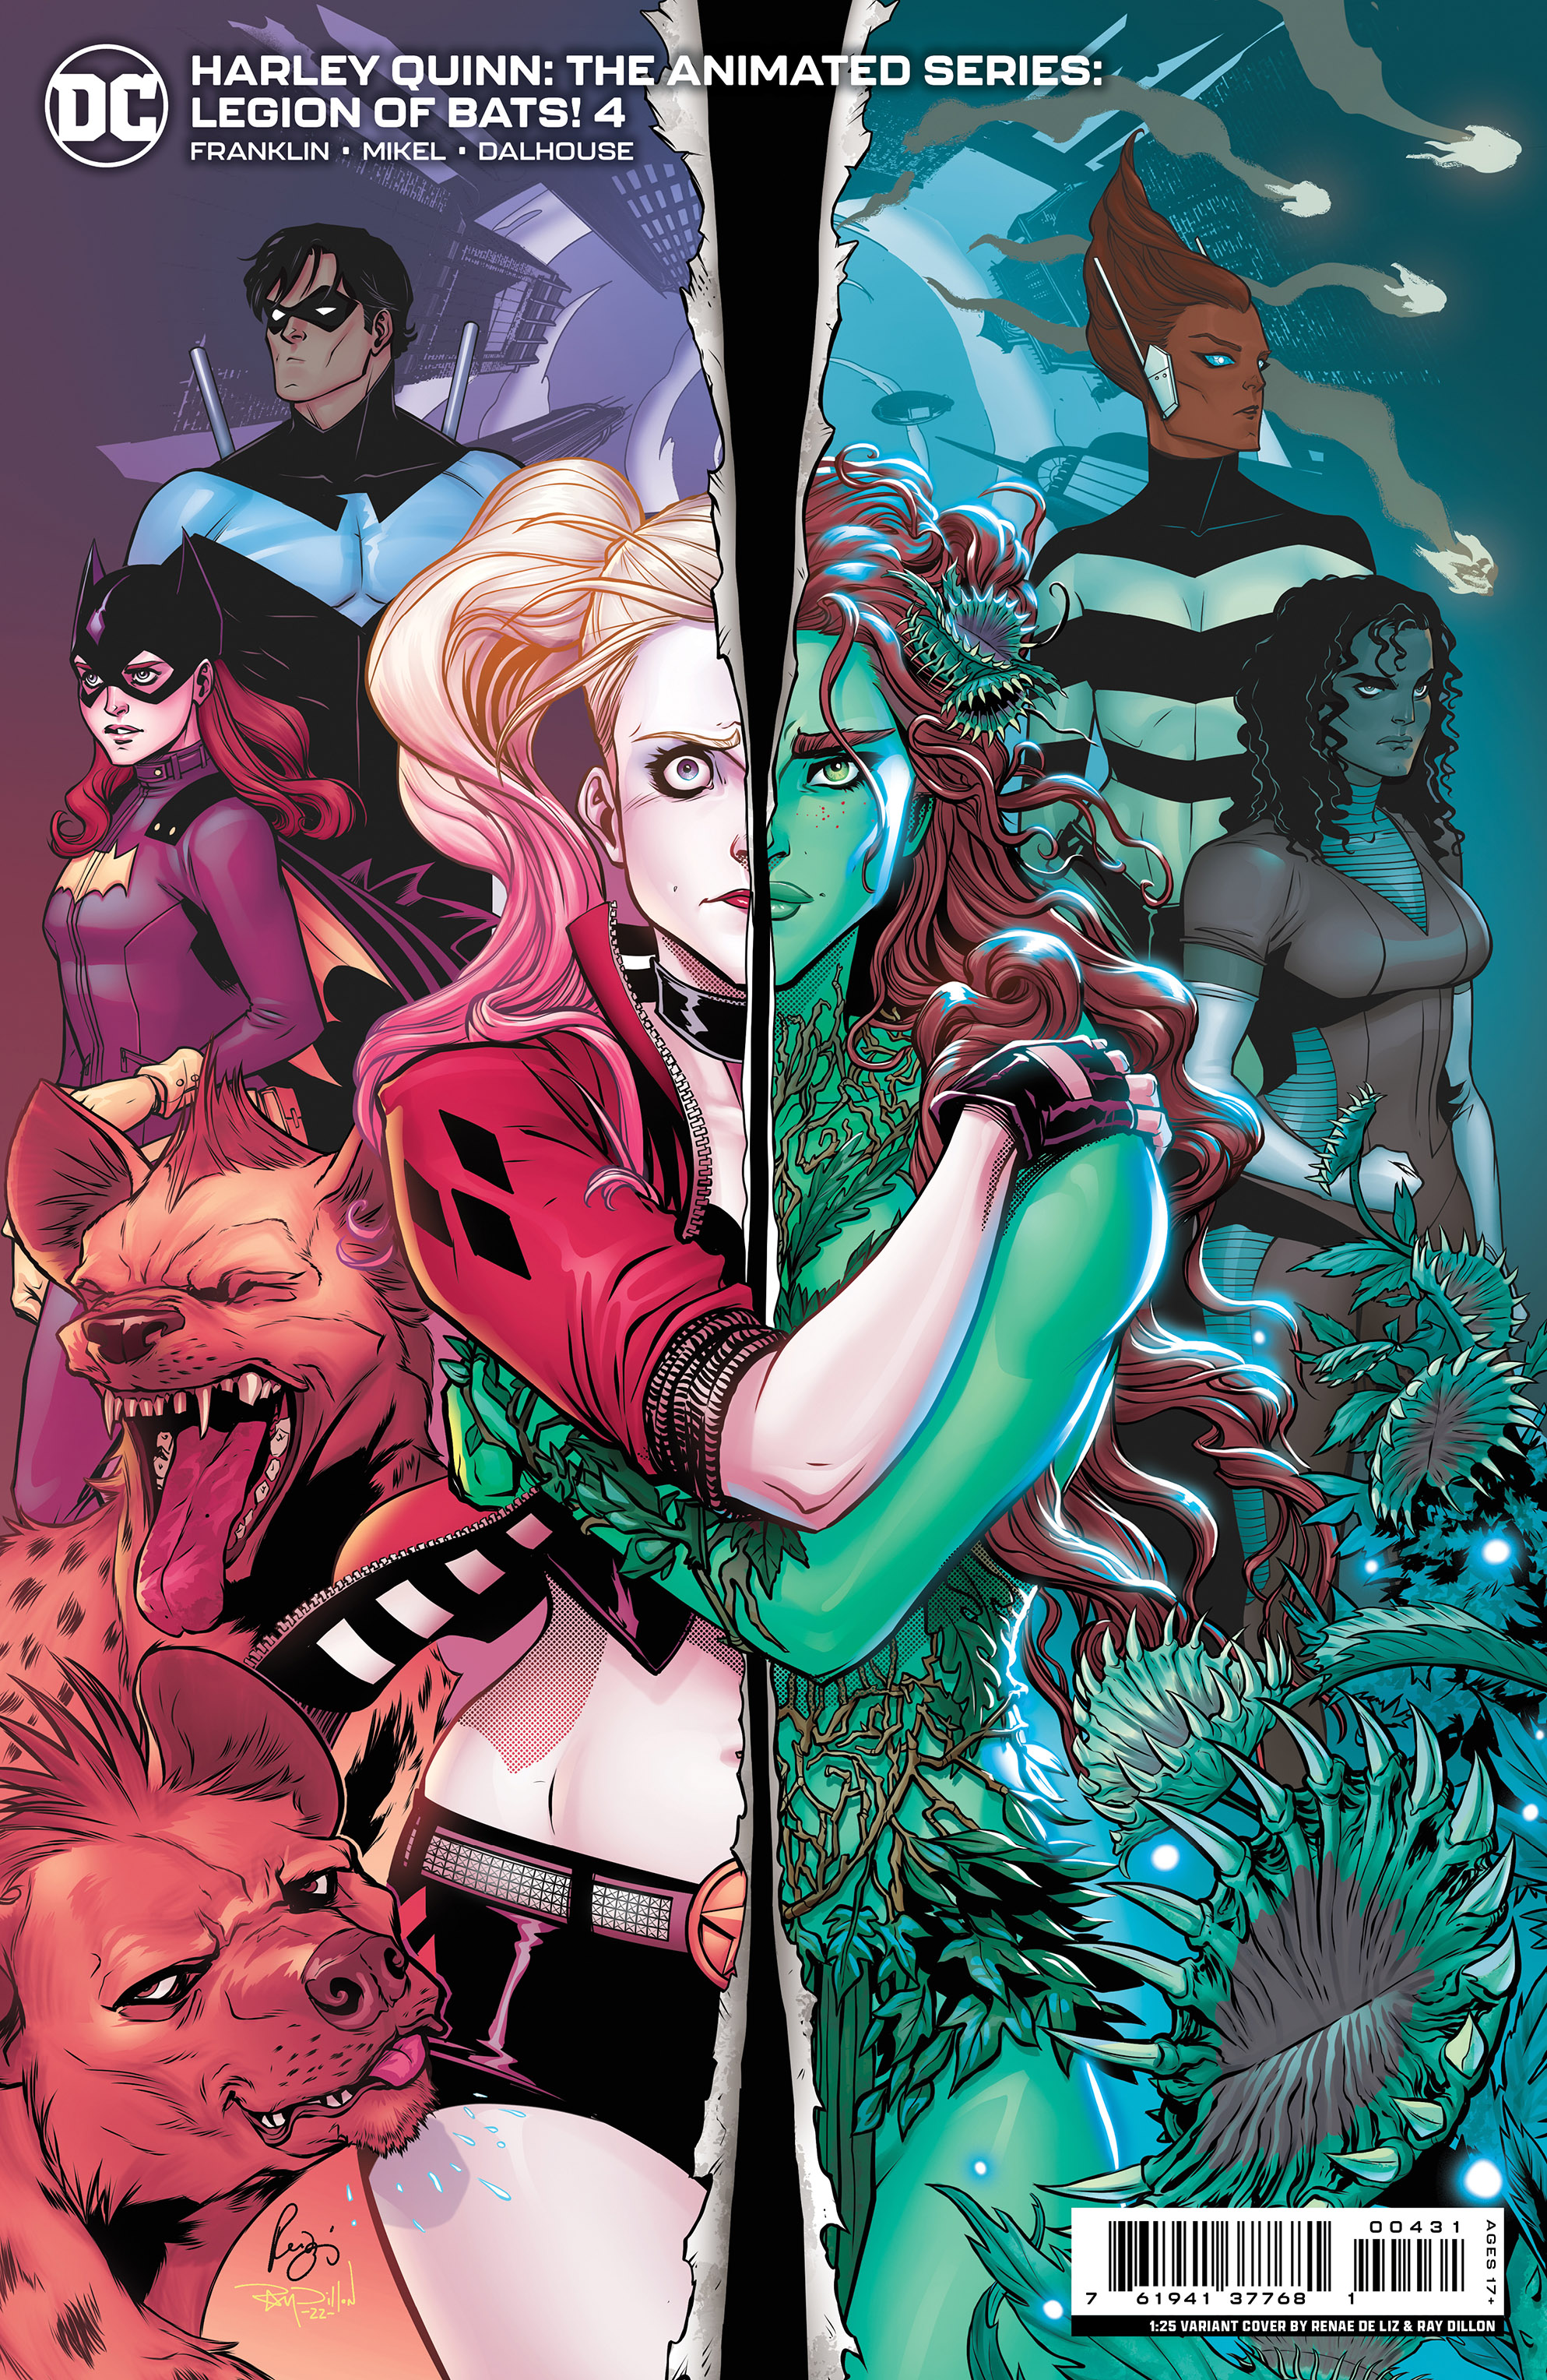 Harley Quinn The Animated Series Legion of Bats #4 Cover C 1 for 25 Incentive Renae De Liz Card Stock V (Of 6)